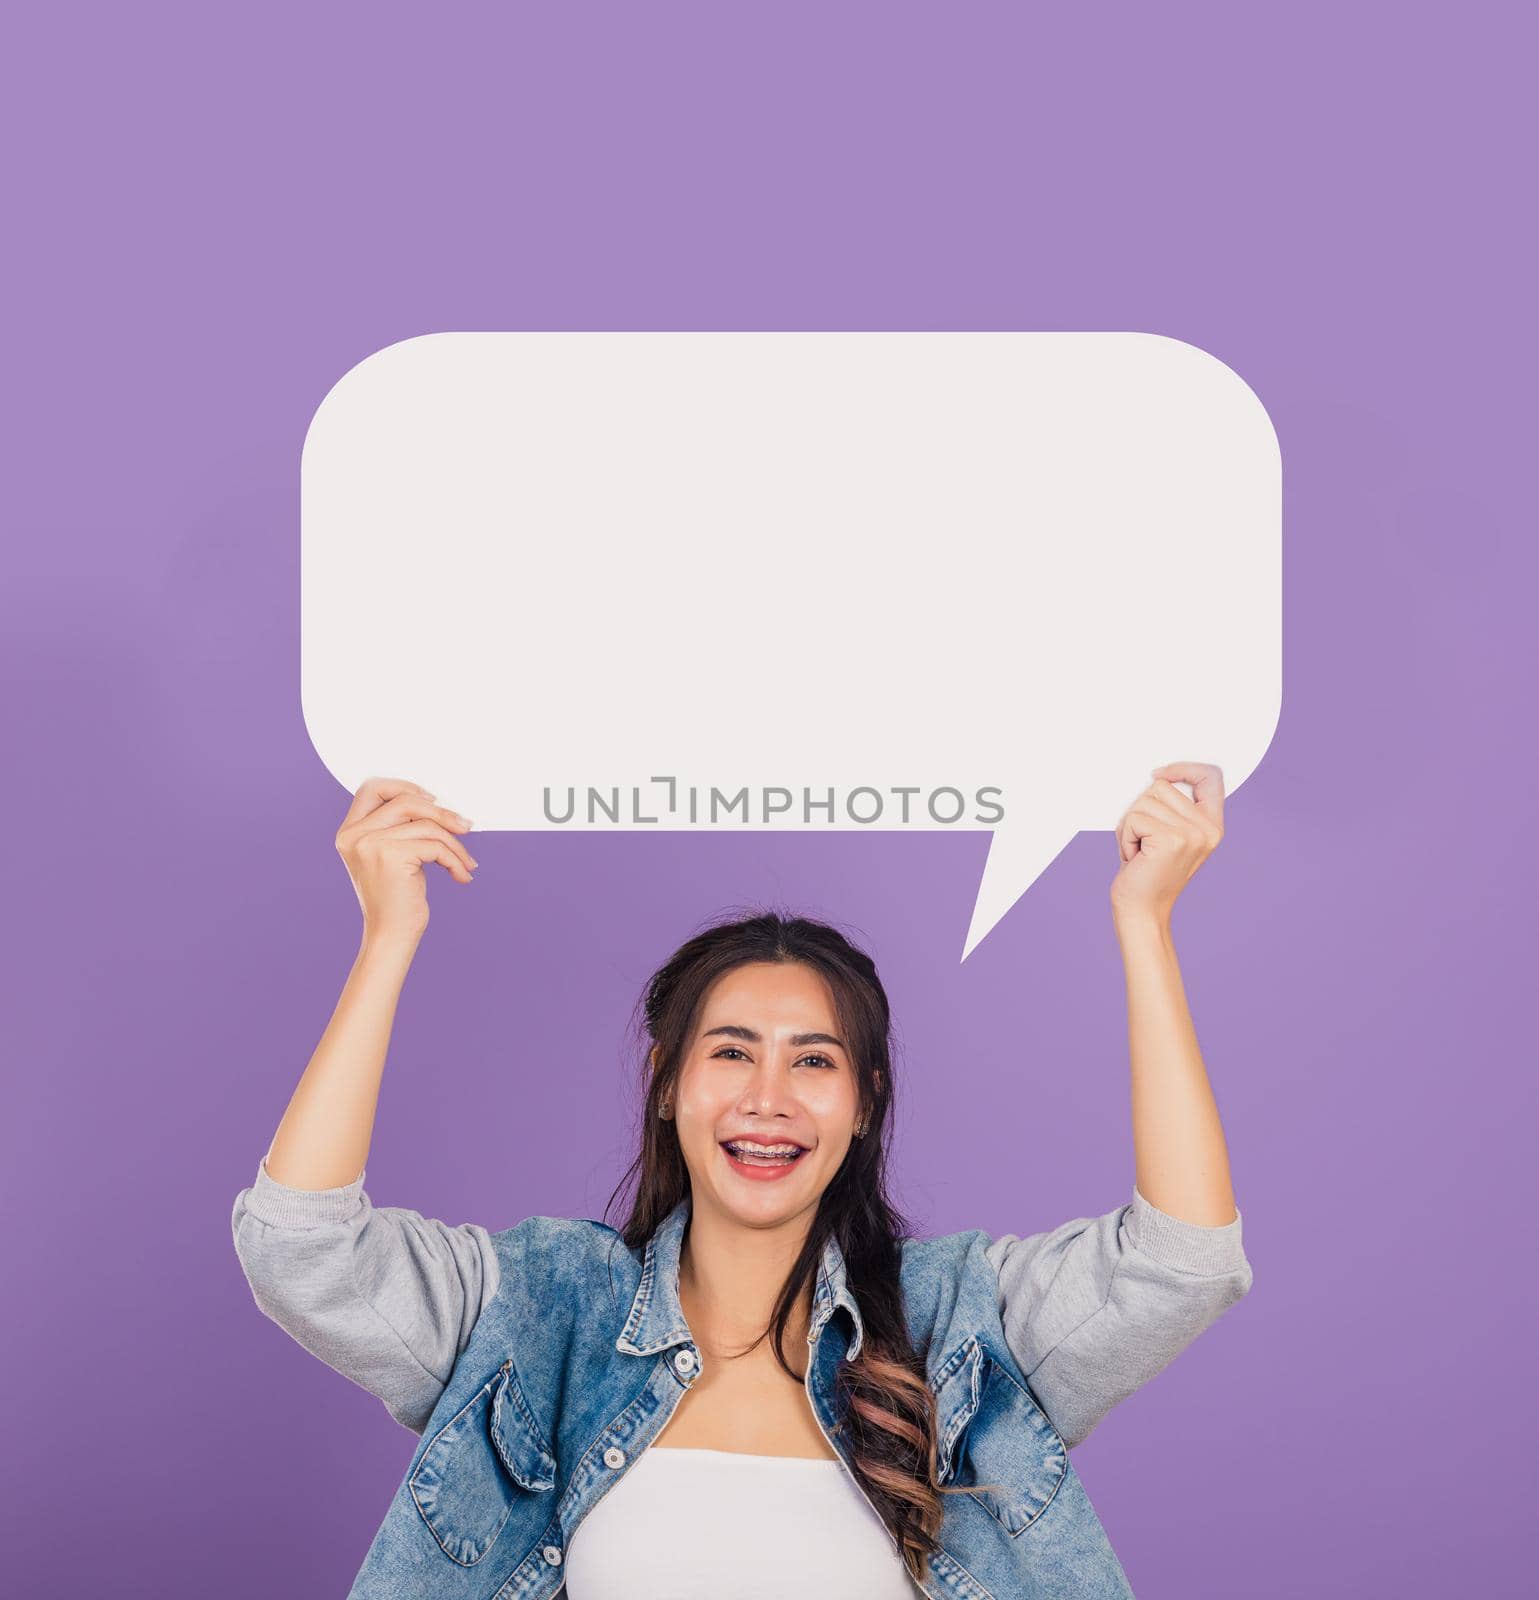 woman smiling excited wear denims hold empty speech bubble sign by Sorapop